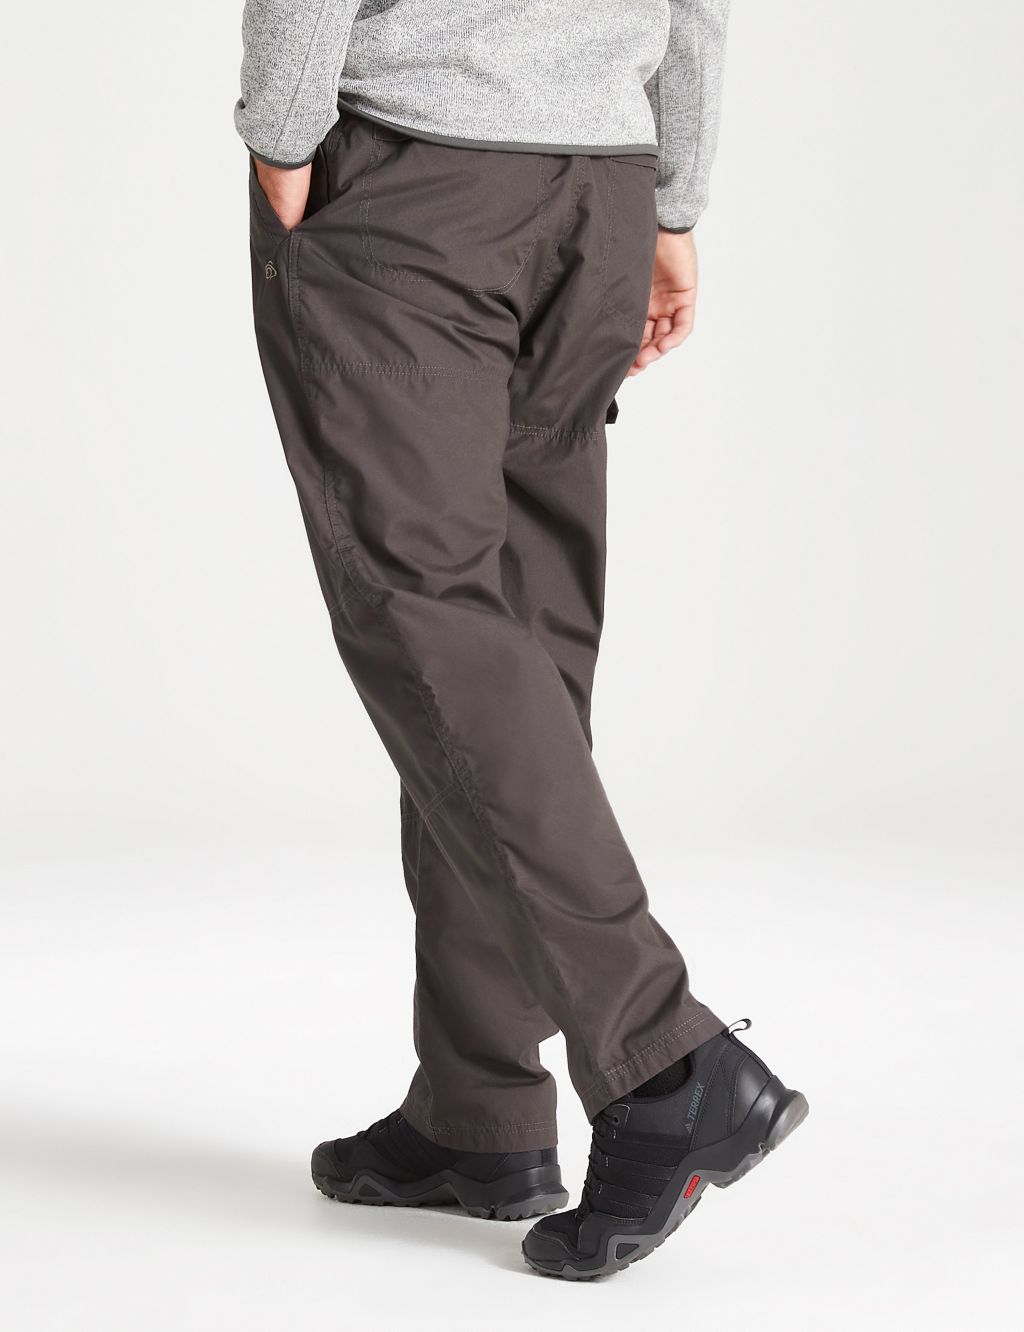 Kiwi Loose Fit Cargo Trousers image 3